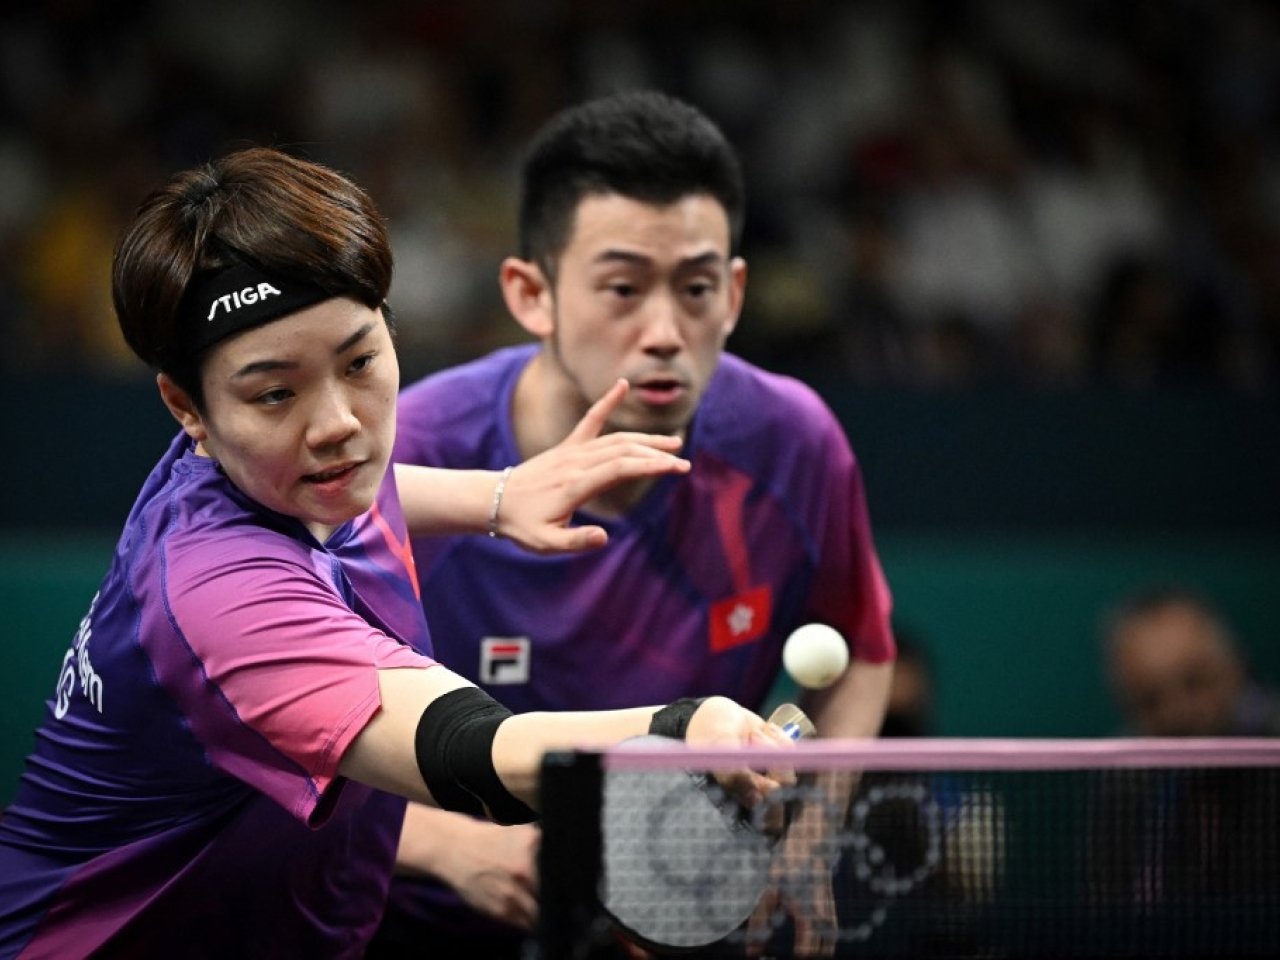 Doo, Wong miss out on bronze in mixed doubles